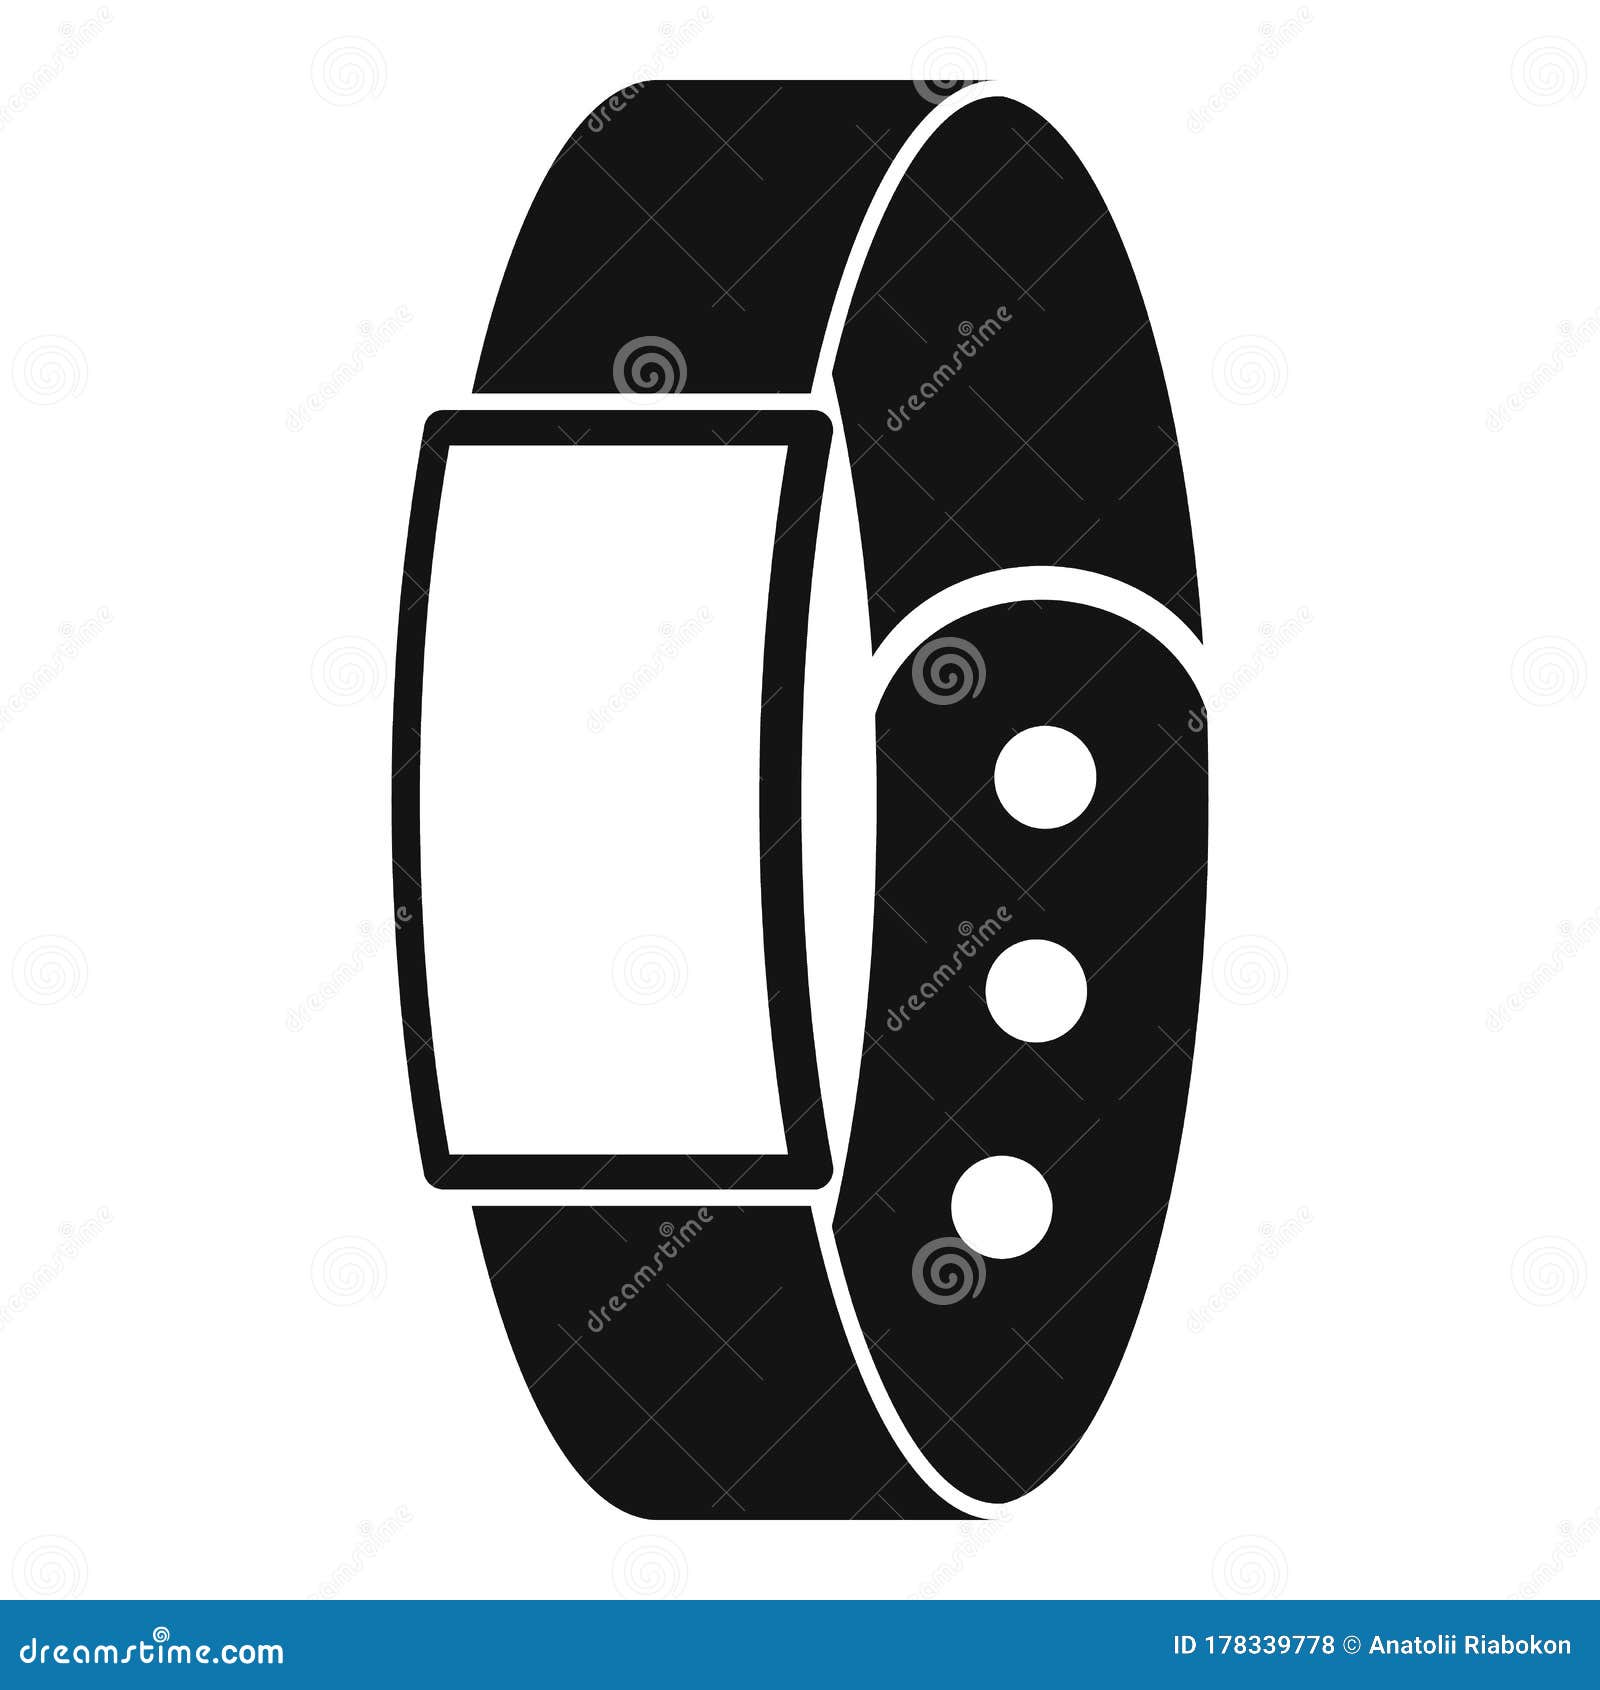 2021 Lowest Price] Wearfit Fitness Tracker Watch Bluetooth Smart Band Sleep  Monitor Wristband Pedometer Call Remind Wearable Smart Bracelet Oled Touch  For Android Ios Smart Phone Price in India & Specifications